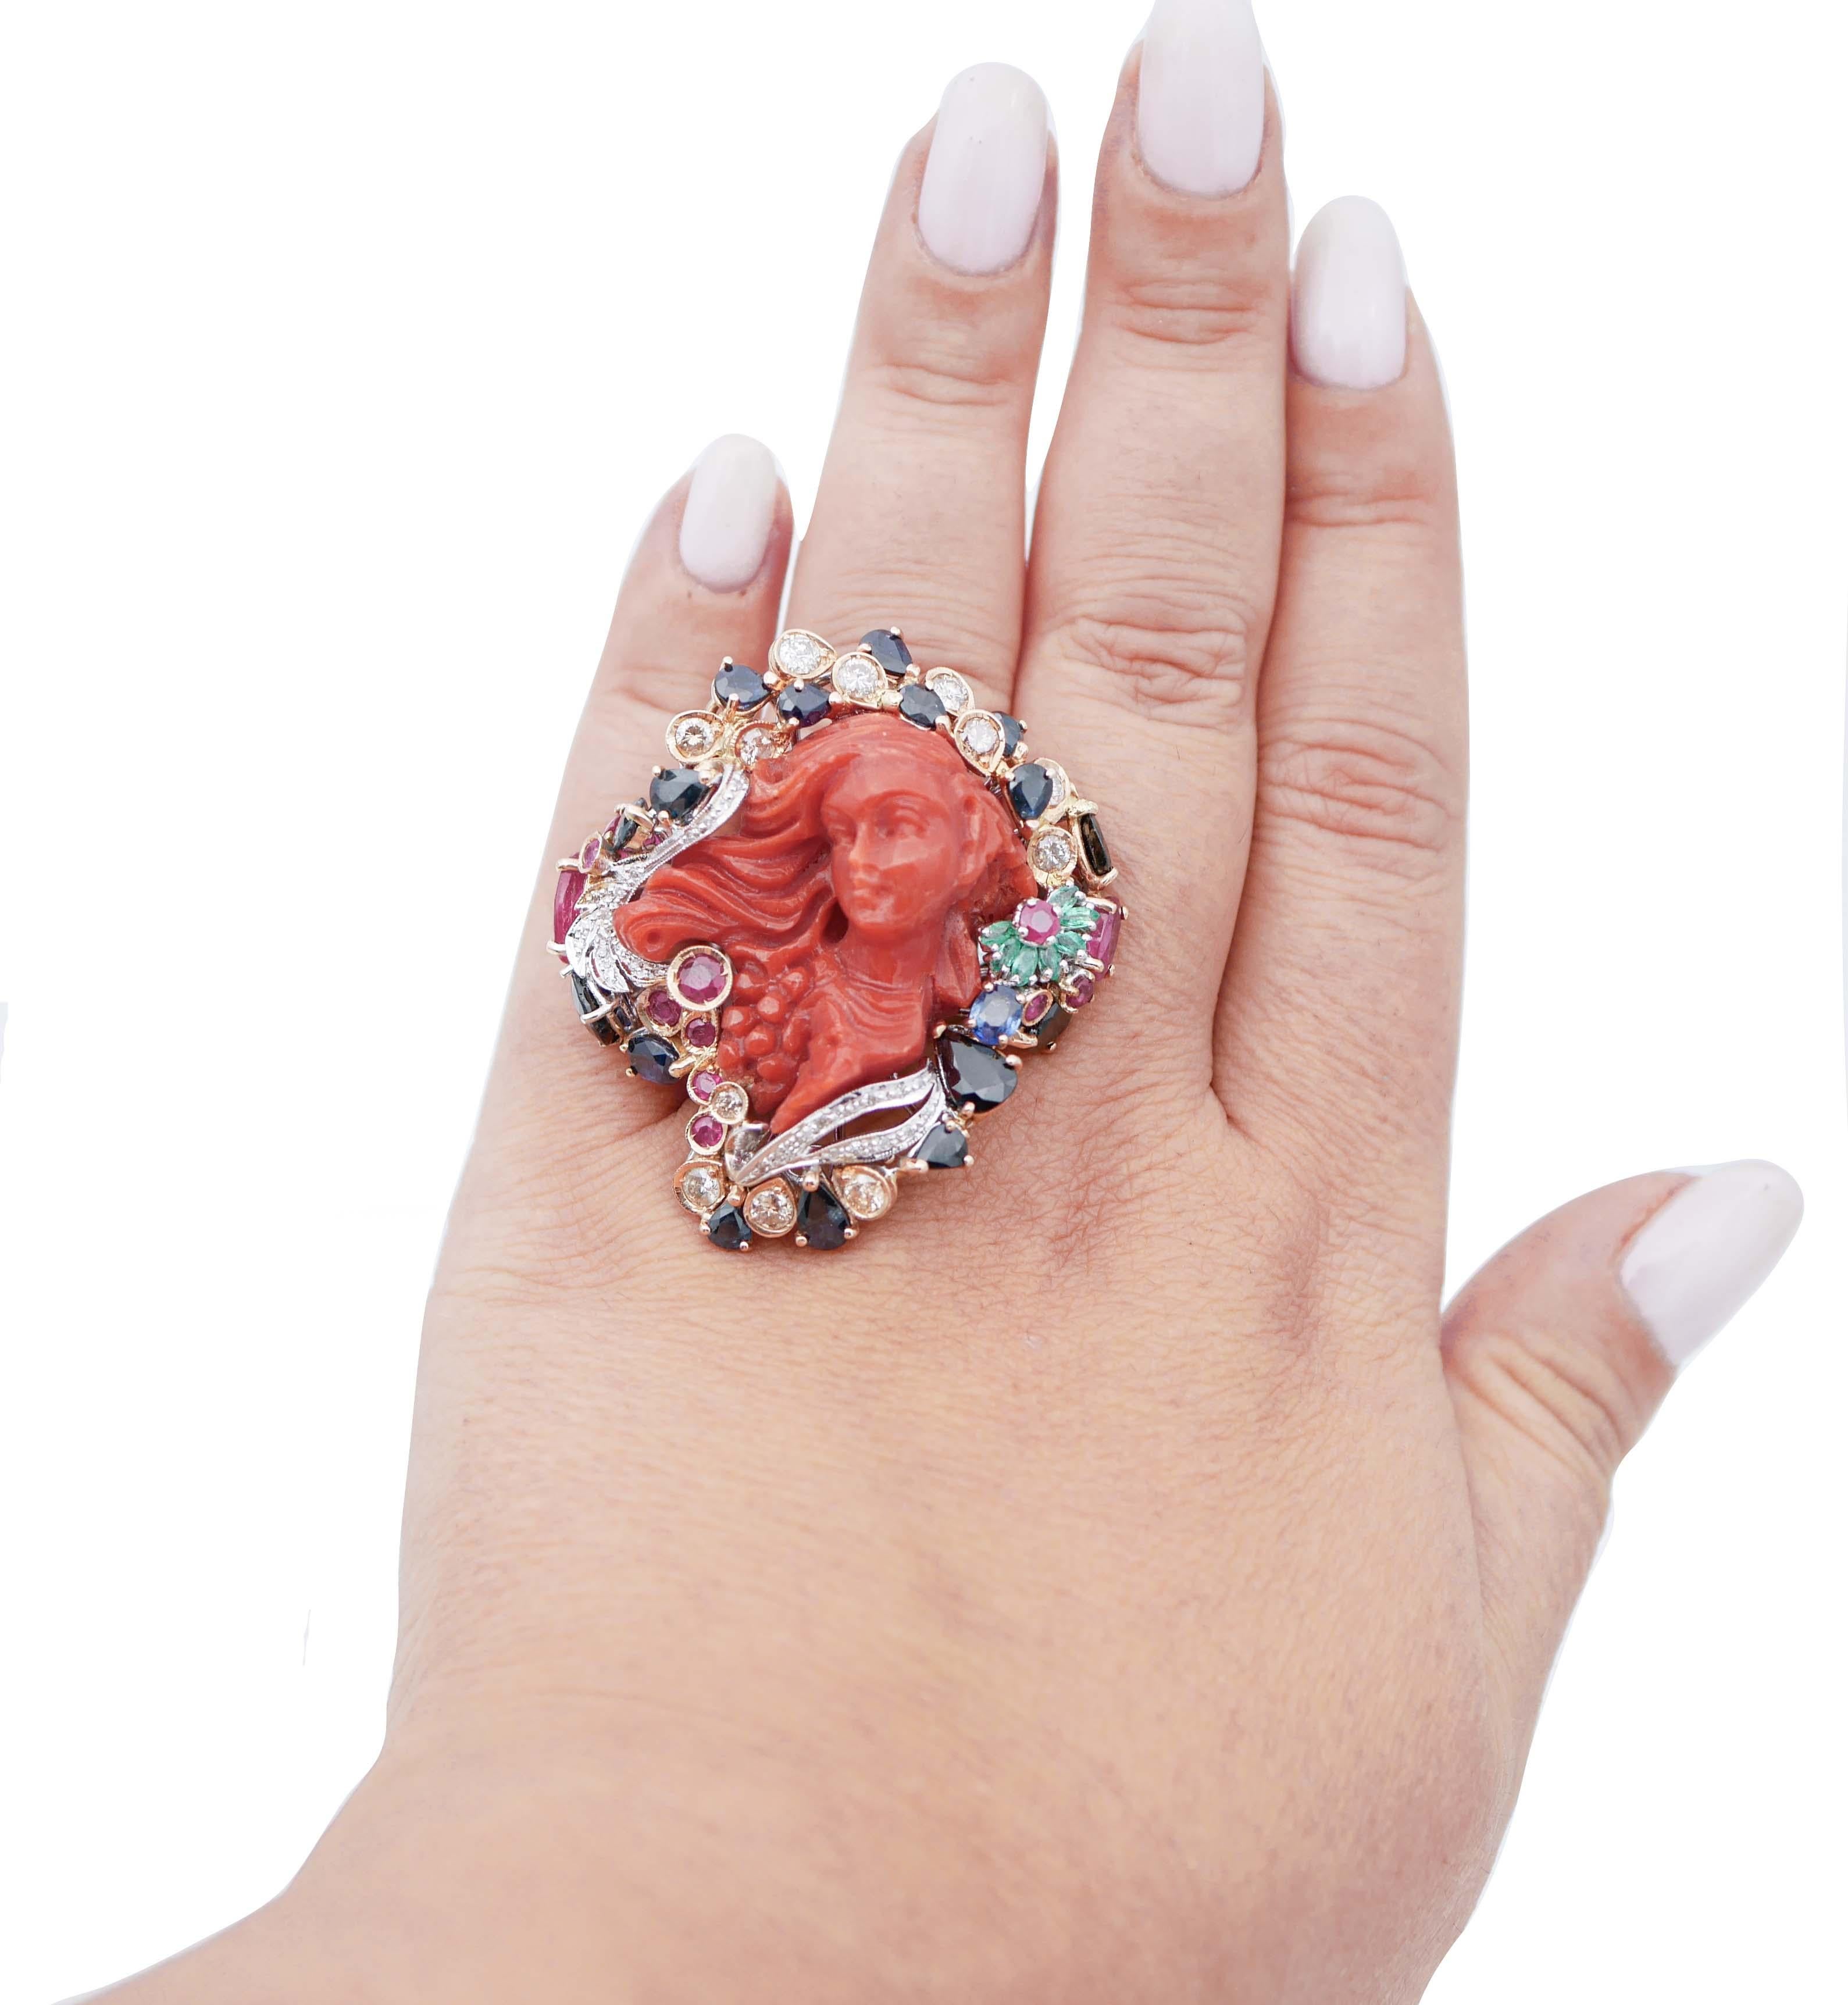 Mixed Cut Coral, Sapphires, Rubies, Emeralds, Diamonds, 14 Karat White and Rose Gold Ring For Sale